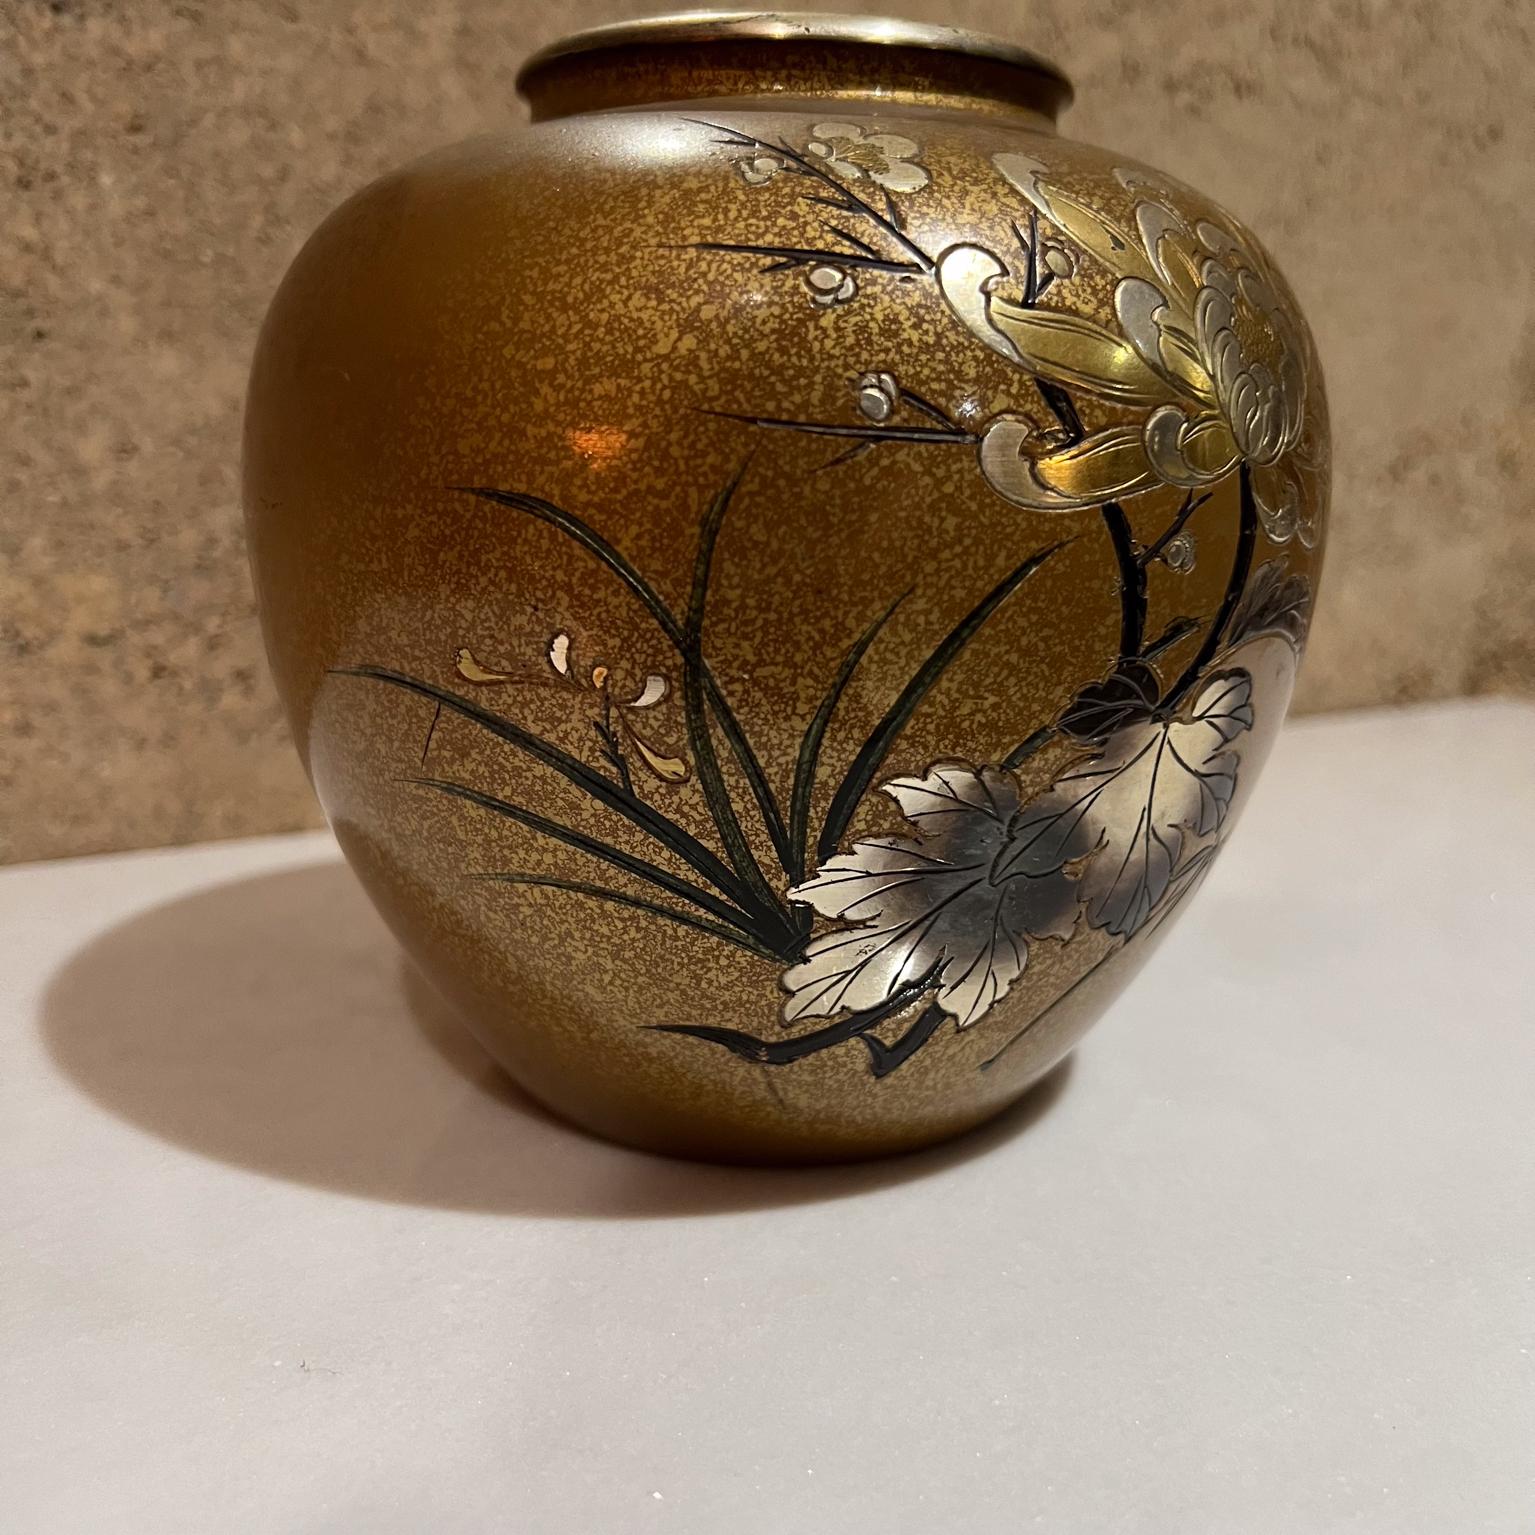 1950s Japanese Bronze Mixed Metal Squat Vase In Good Condition For Sale In Chula Vista, CA